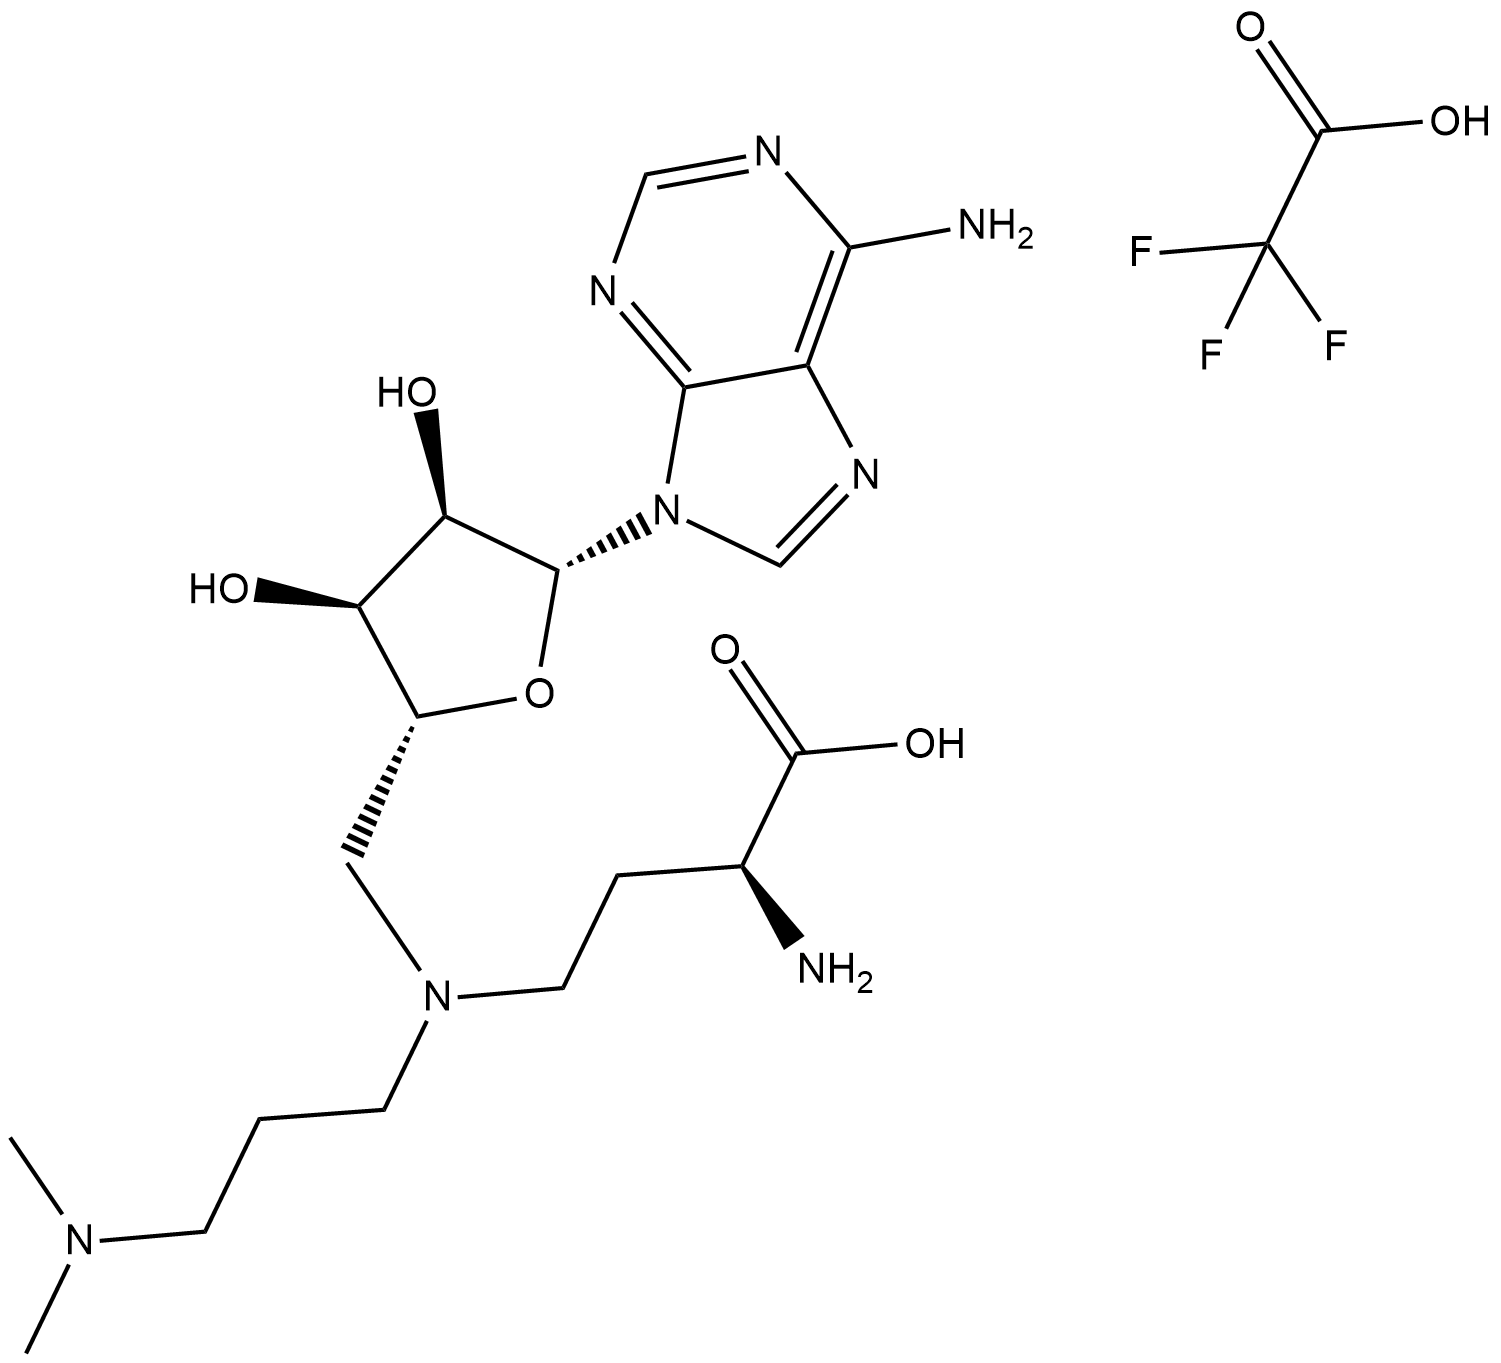 GSK2807 Trifluoroacetate  Chemical Structure